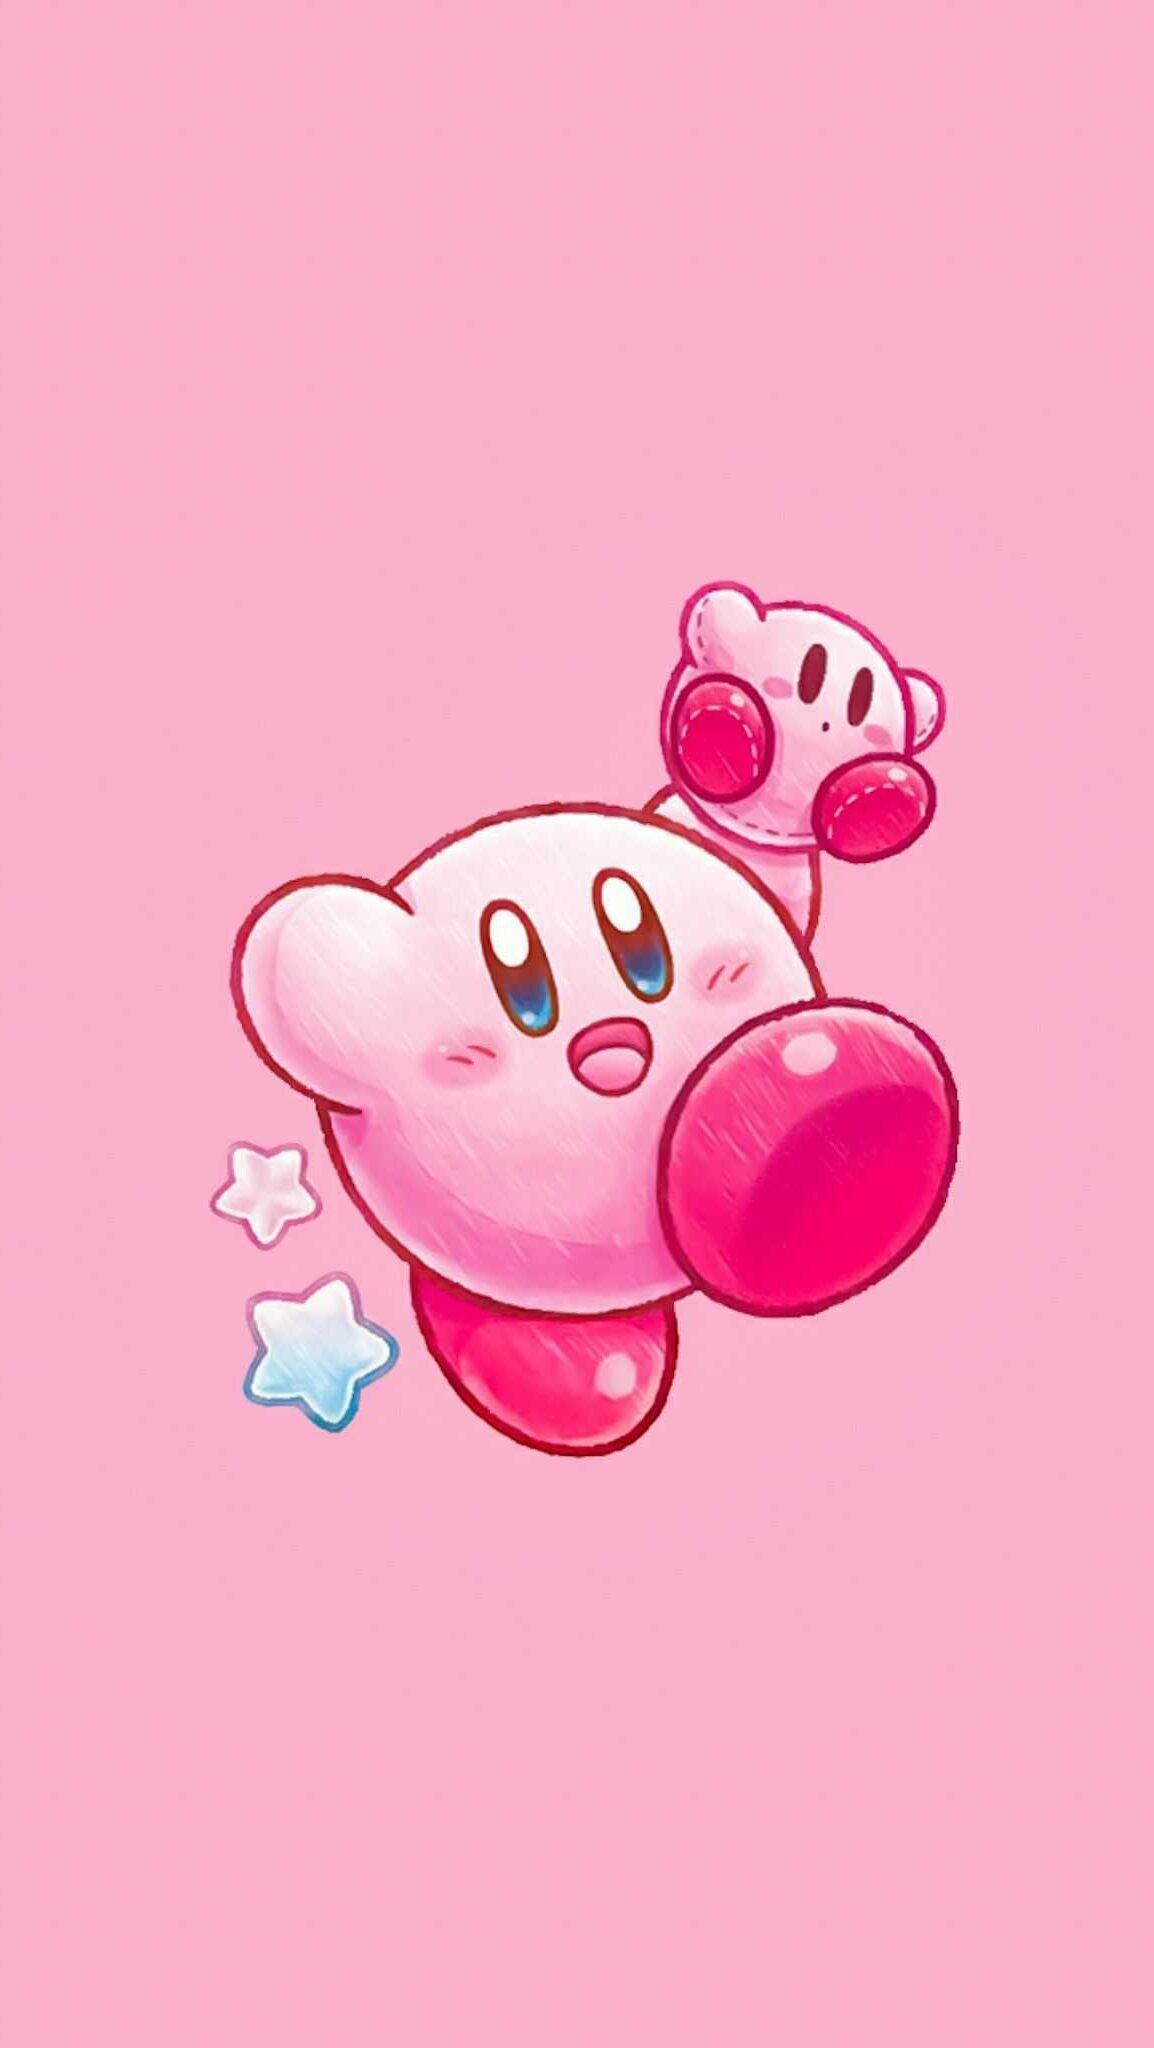 Background Kirby Wallpaper Discover more Action, Cute, Developed, Game Series, Kirby wallpaper. /back. Kirby, Hero wallpaper, Wallpaper